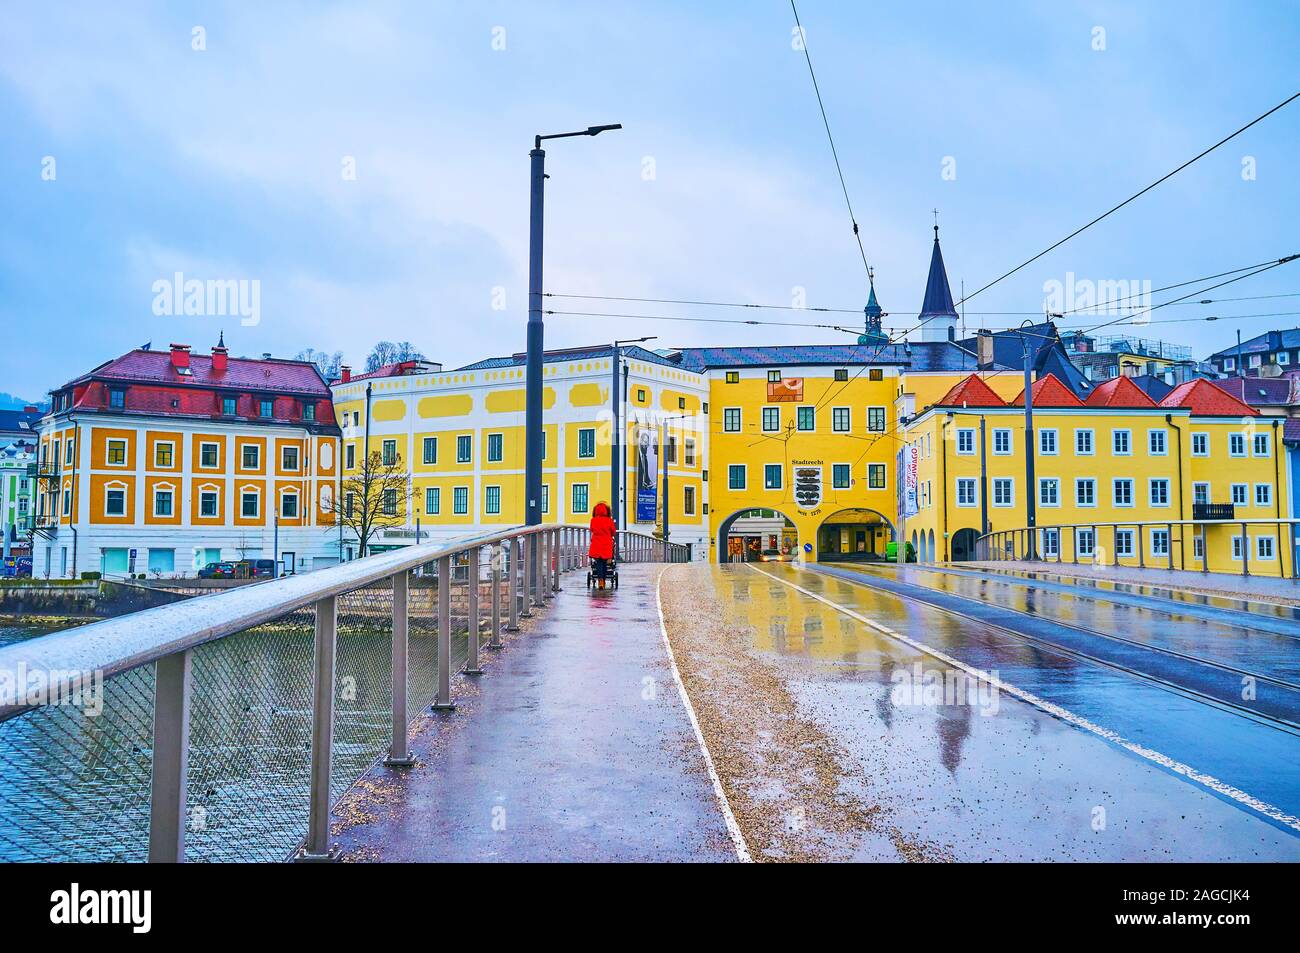 GMUNDEN, AUSTRIA - FEBRUARY 22, 2019: The rainy day in Gmunden with reflections of old town's buildings on the dark road of wet Traun bridge (Traunbru Stock Photo